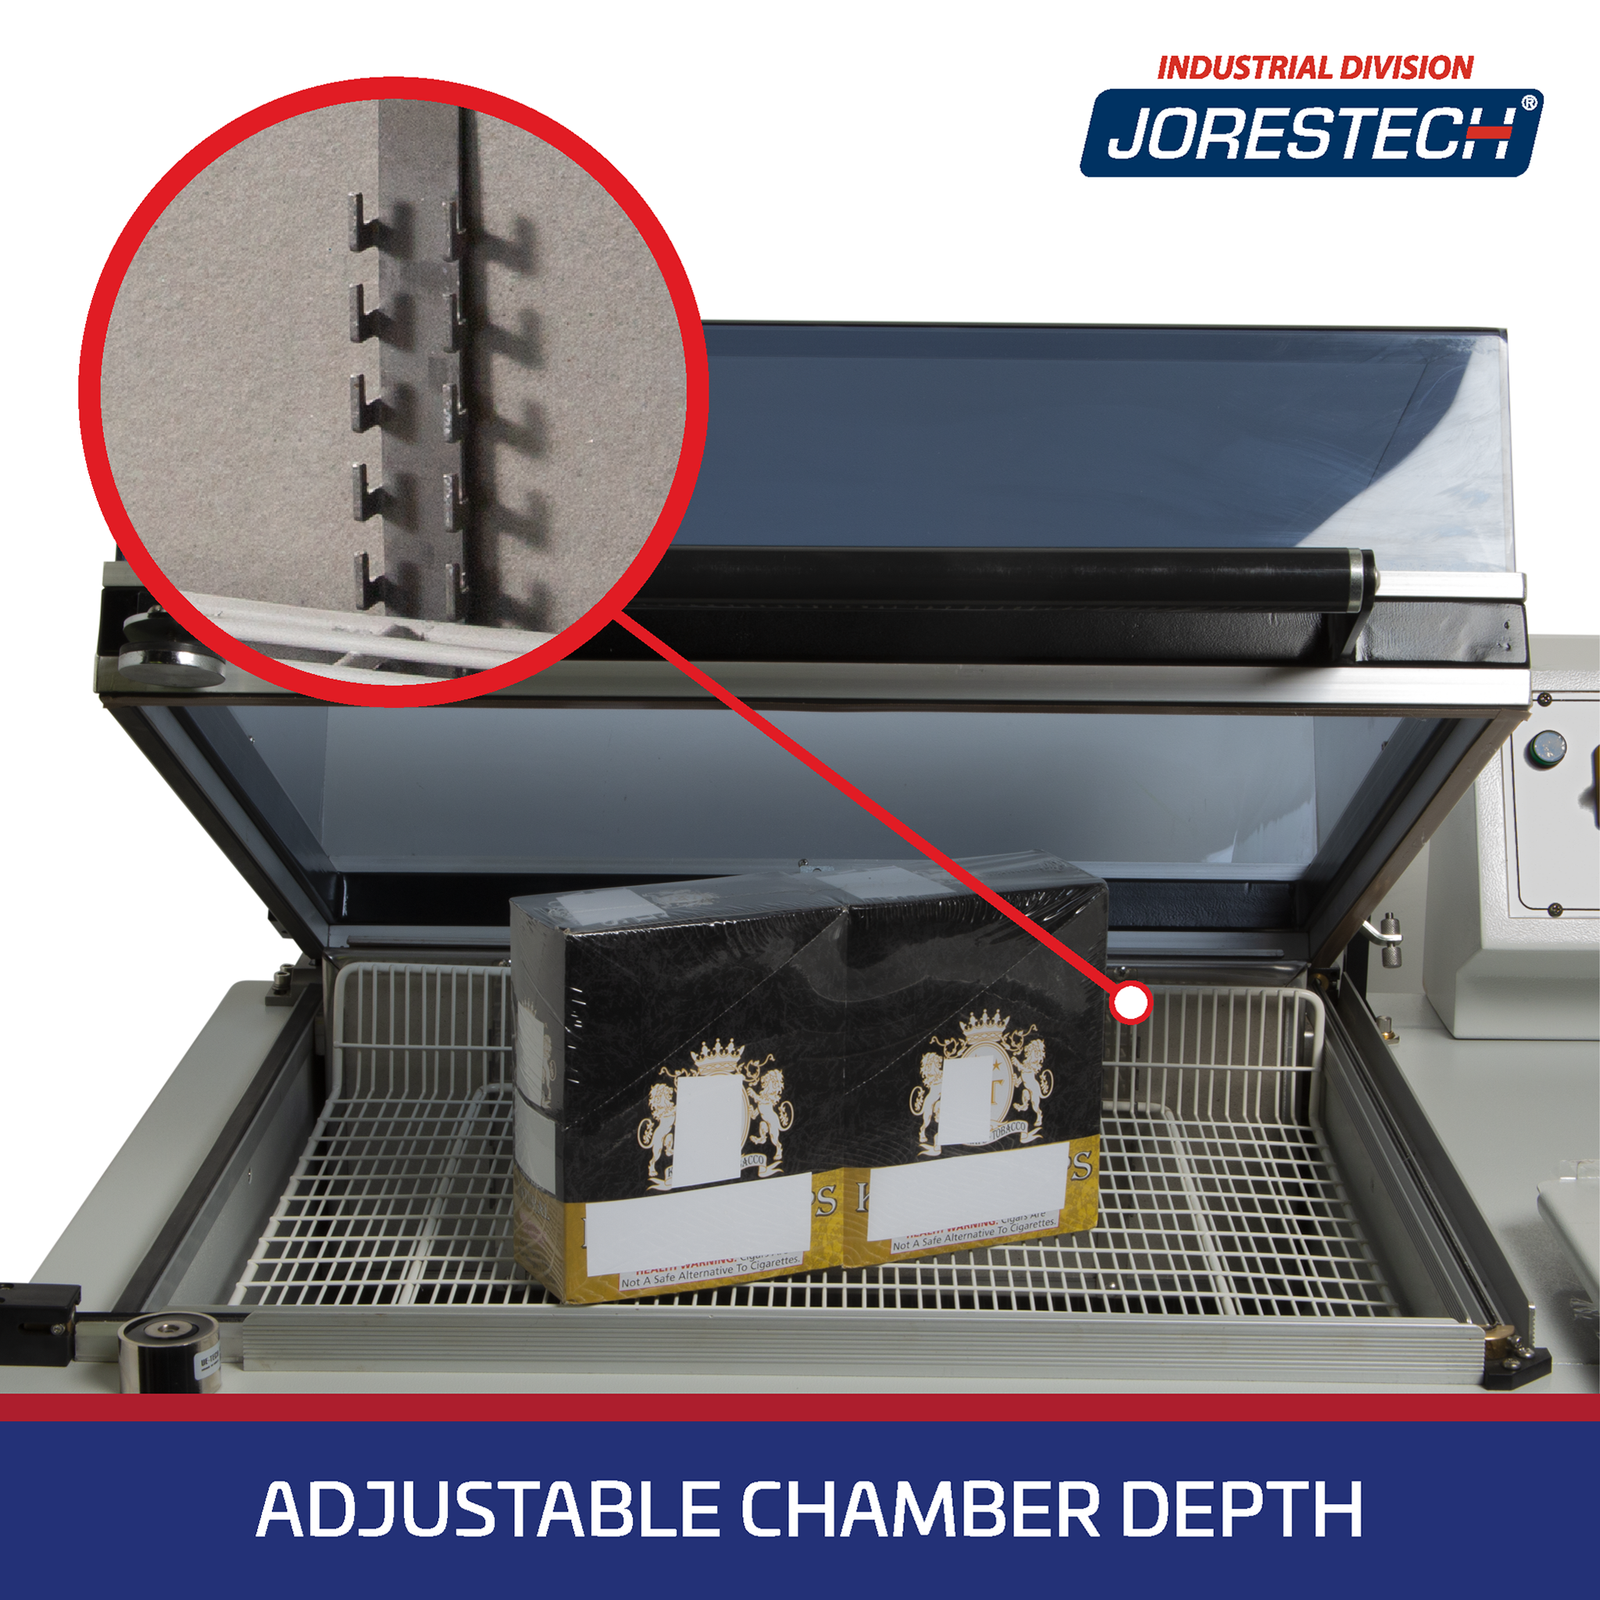 Close up of the shrink chamber or a JORESTECH shrink wrapping system with two boxes that were shrink packaged together into one bundle. A zoomed detail shows the height adjustment racks behind the chamber tray where chamber depth can be adjusted. Blue banner on the bottom says: Adjustable Chamber Depth.